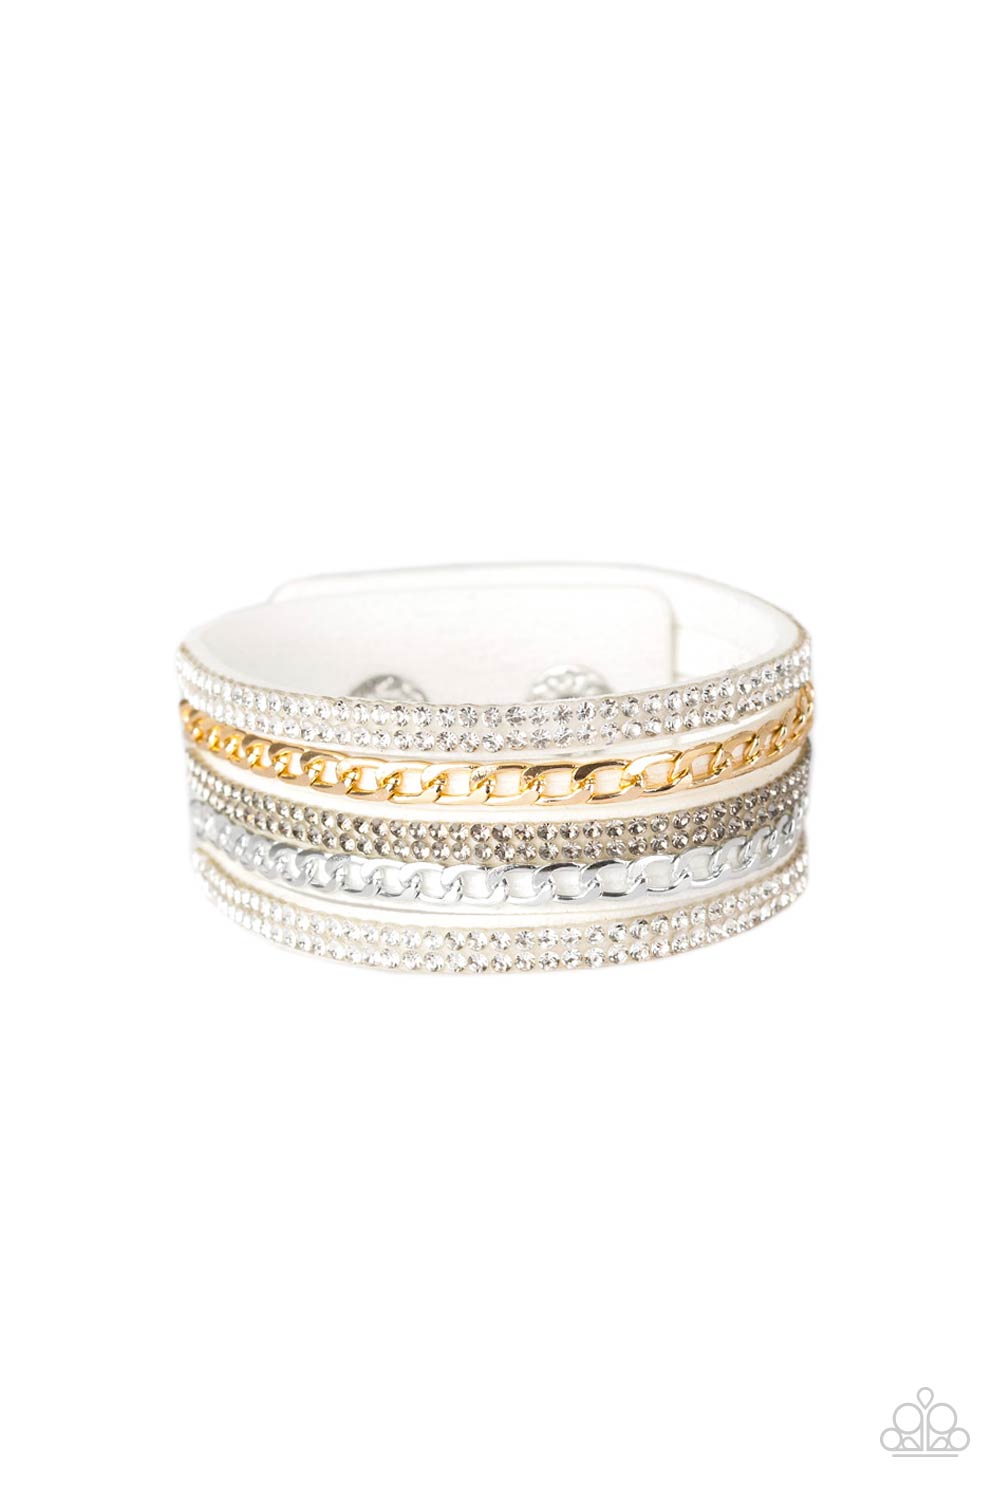 Fashion Fiend White, Silver and Gold Urban Wrap Snap Bracelet - Paparazzi Accessories- lightbox - CarasShop.com - $5 Jewelry by Cara Jewels